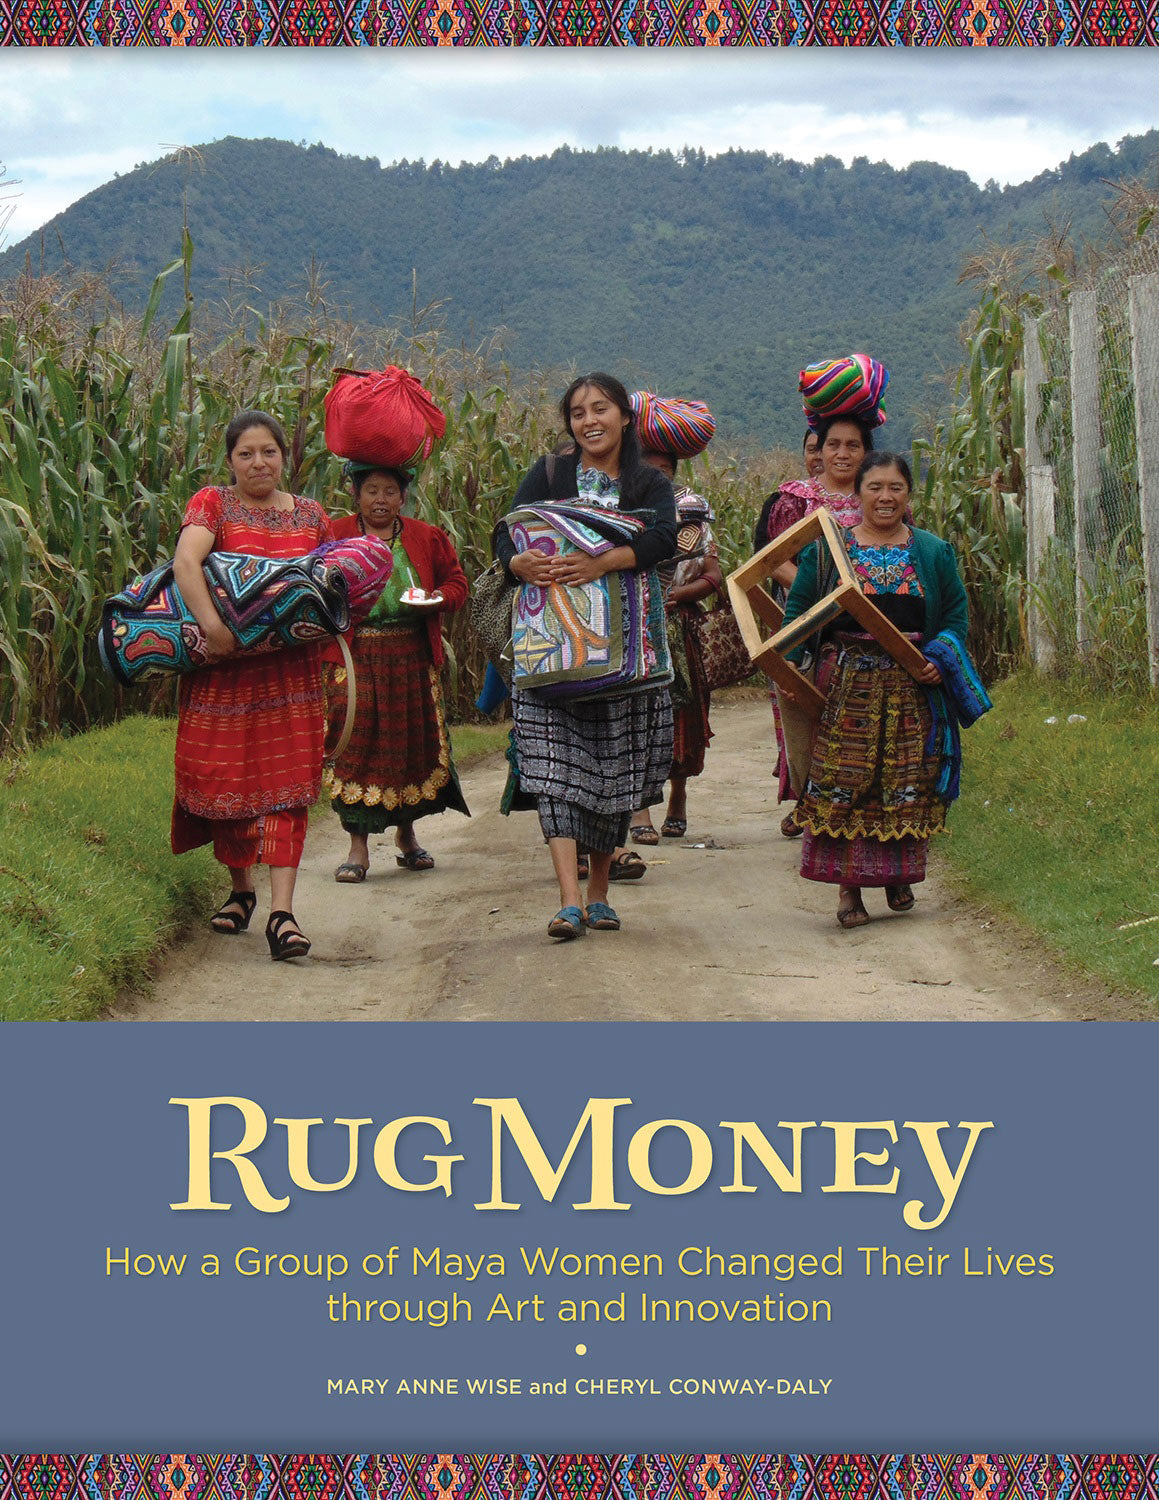 B1008: Rug Money: How a Group of Maya Women Changed Their Lives through Art and Innovation